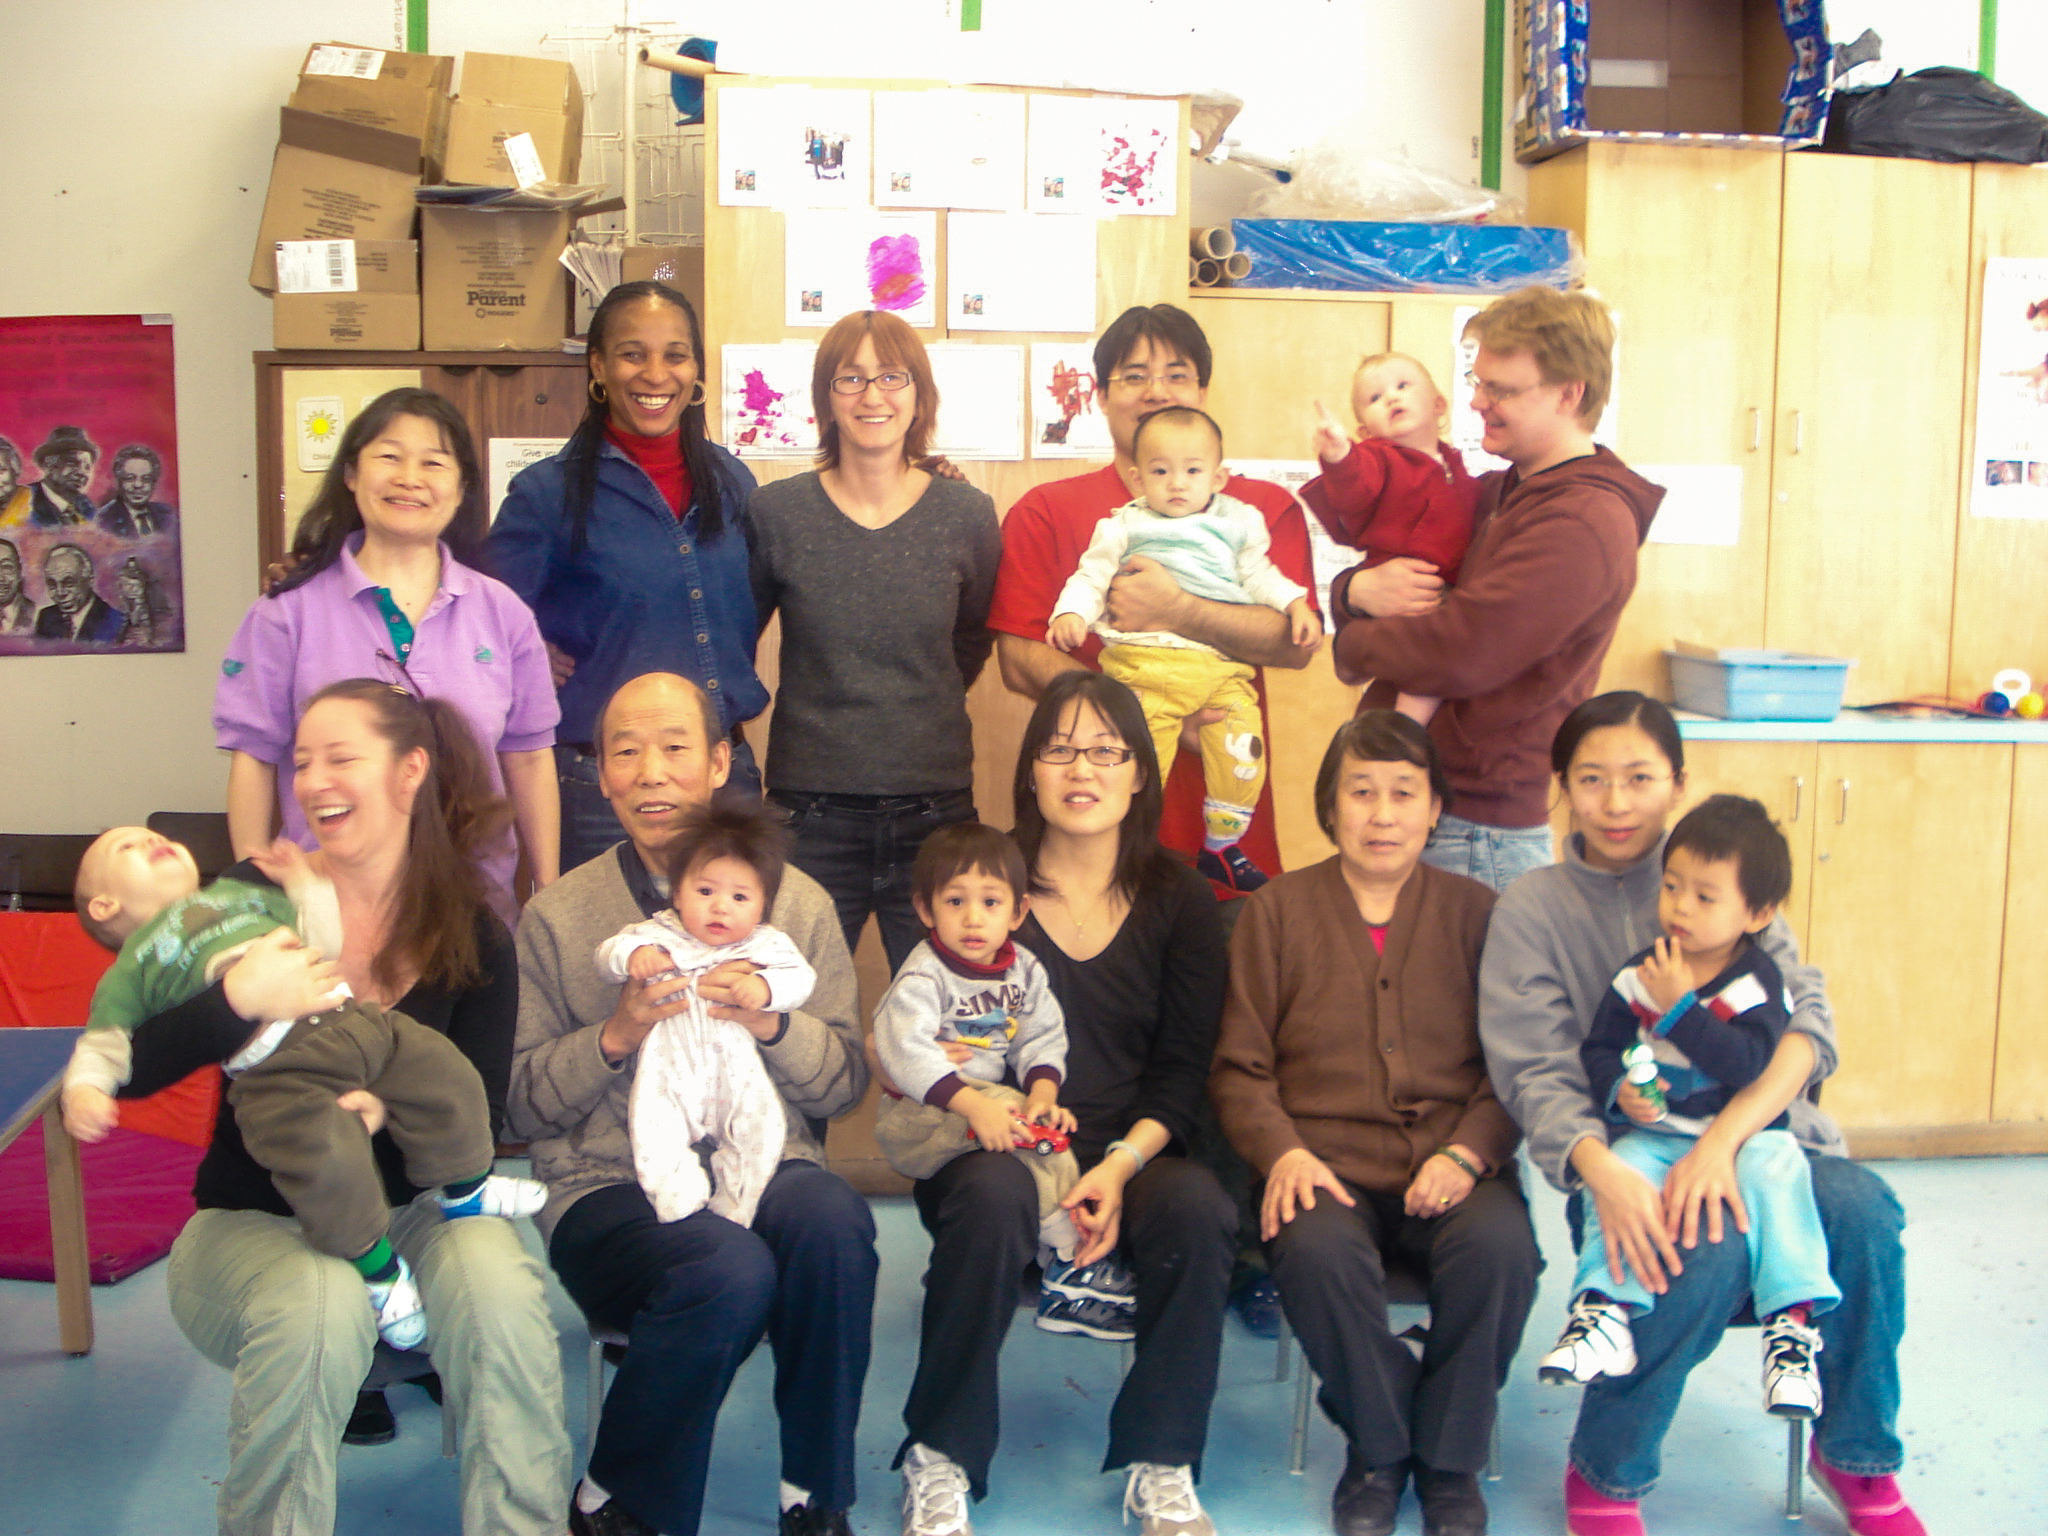 Joanne with staff and participants of The 519 EarlyON program